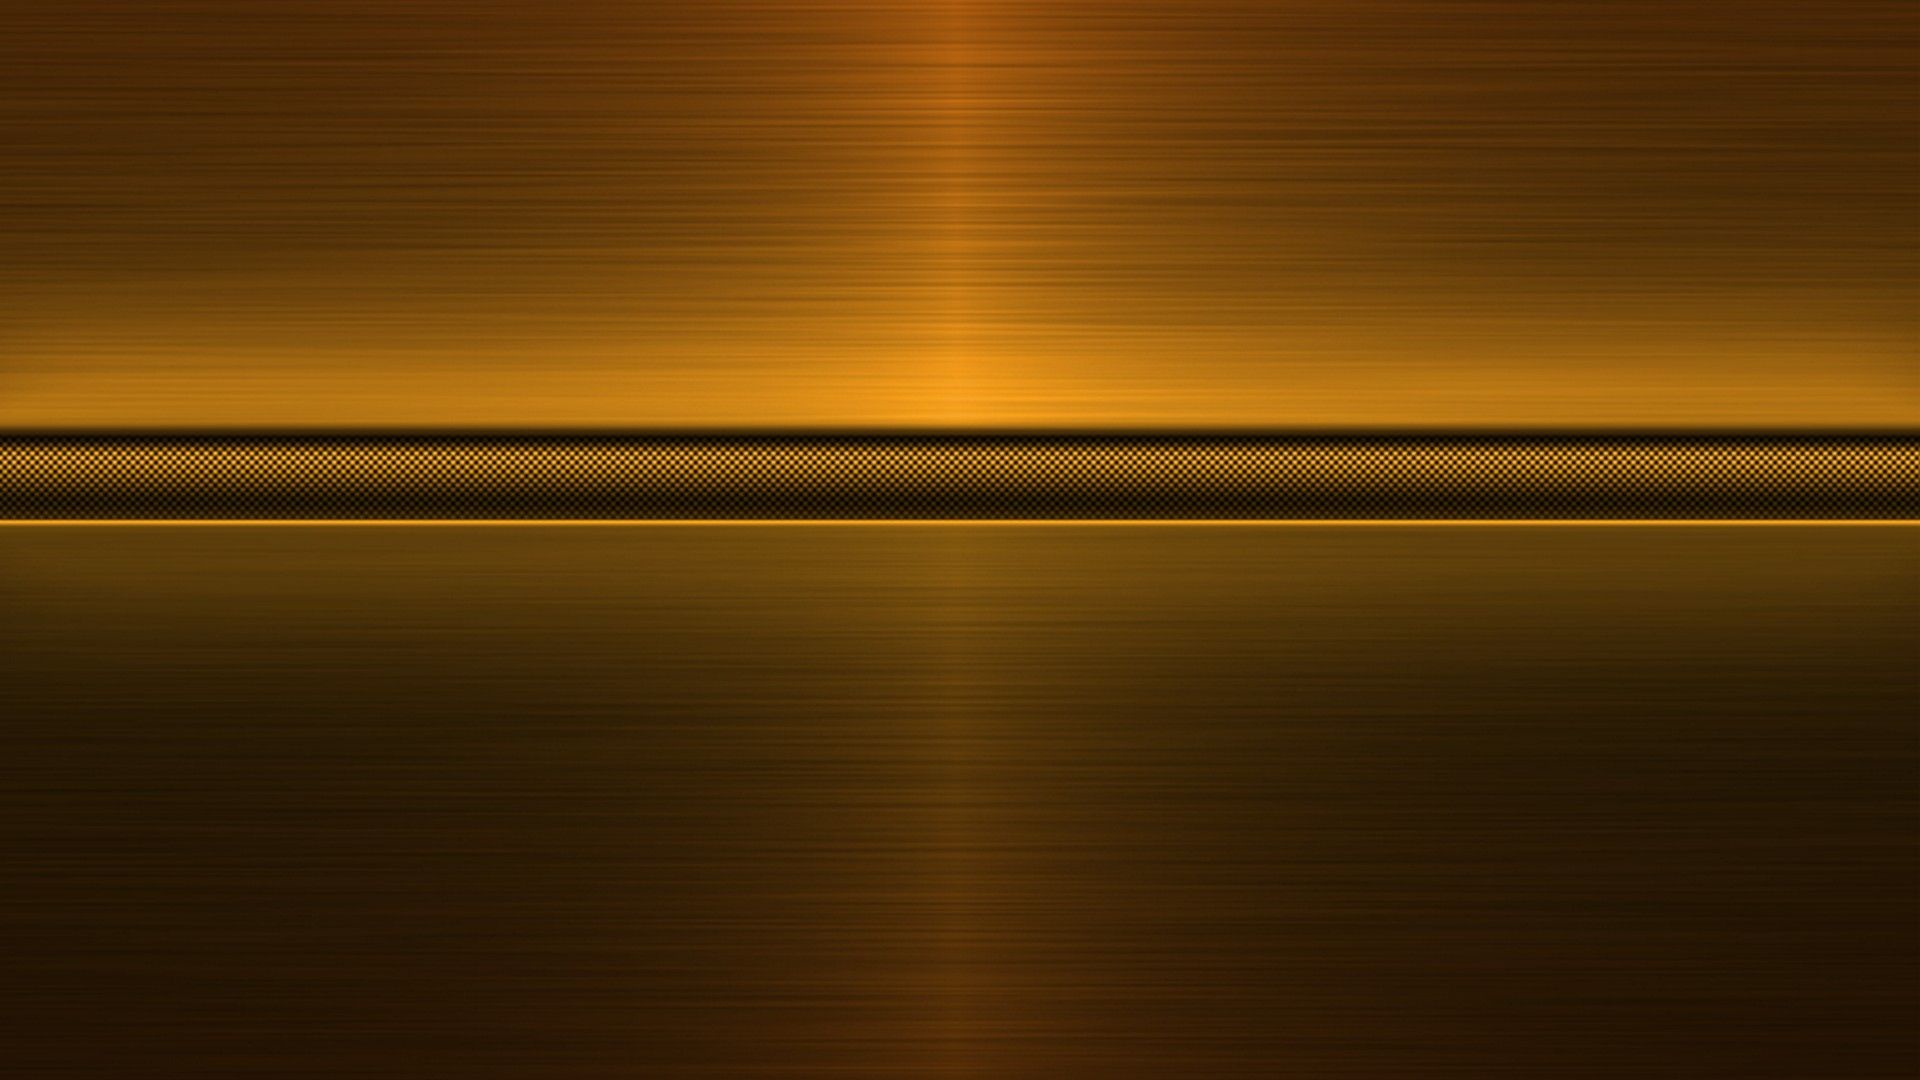 Black and Gold For Windows   Live Wallpaper HD Iphone 7